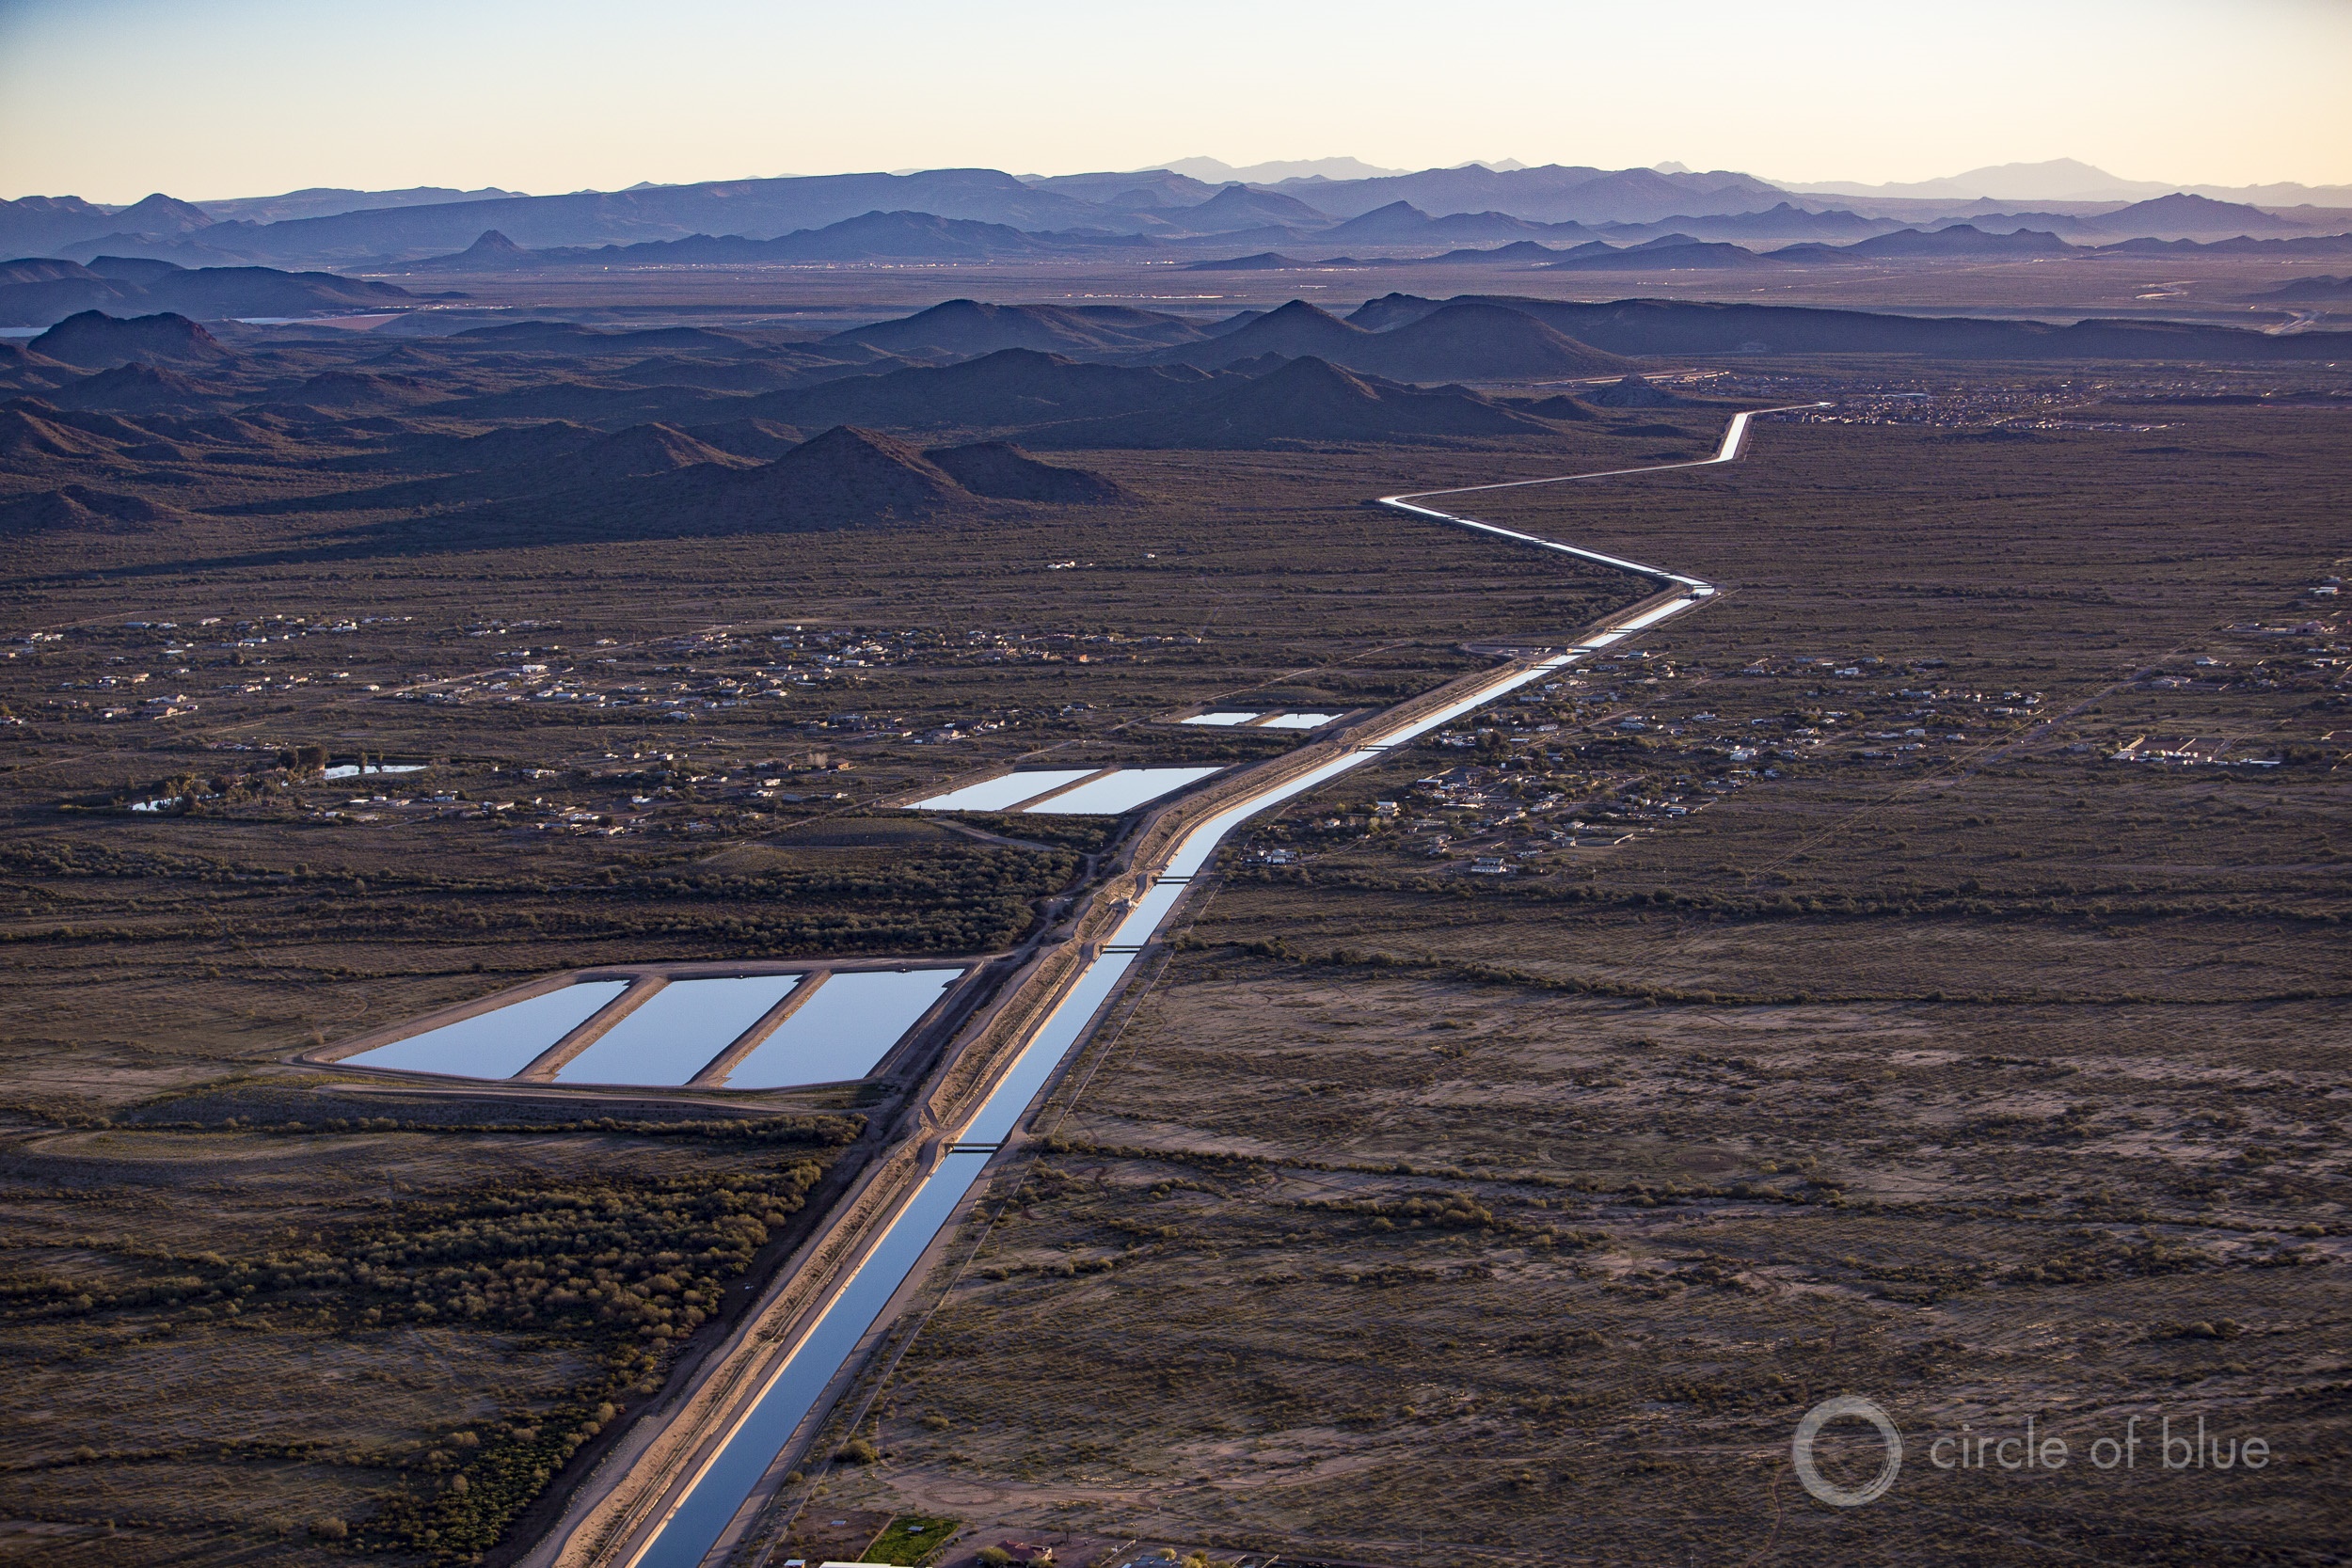 The Central Arizona Project canal snakes 336 miles across the desert to deliver water to three counties in the heart of the state. Photo © J. Carl Ganter / Circle of Blue